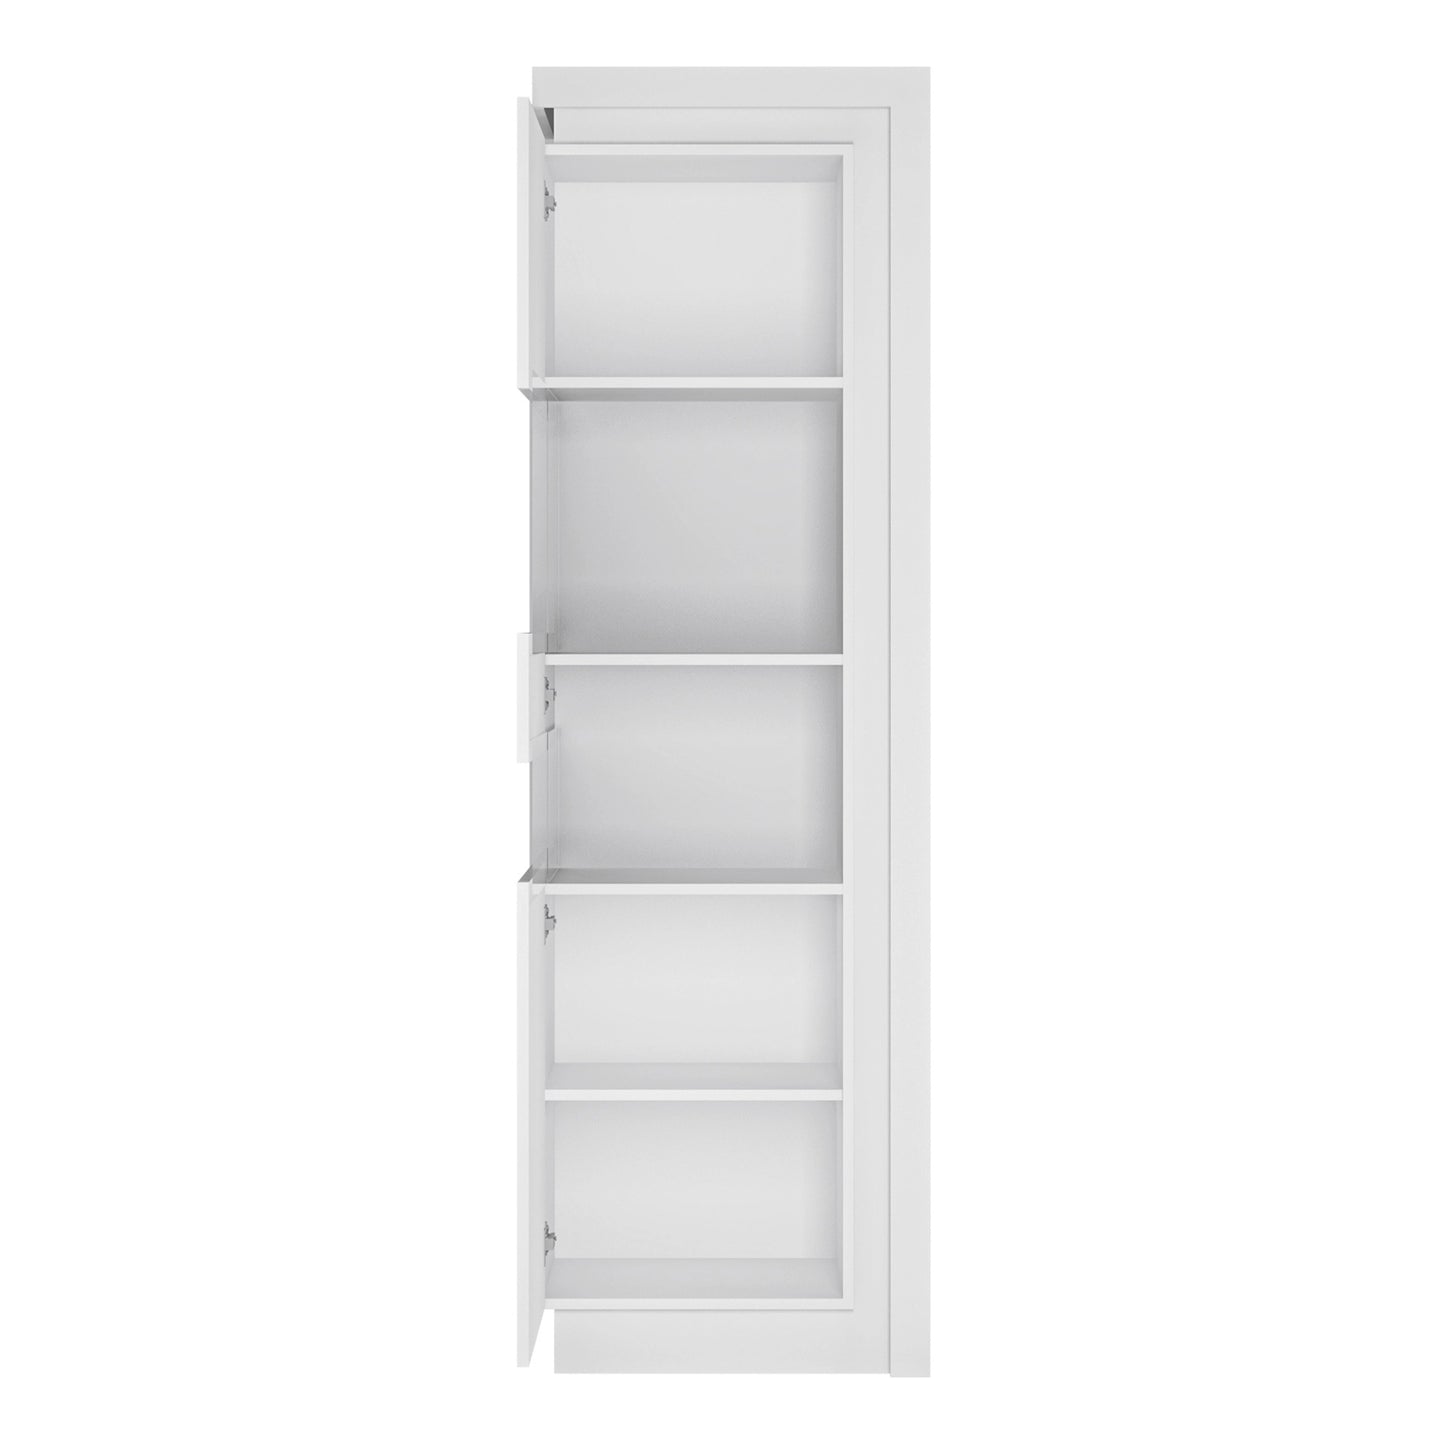 Furniture To Go Lyon Tall Narrow Display Cabinet (LHD) (Including Led Lighting) in White & High Gloss